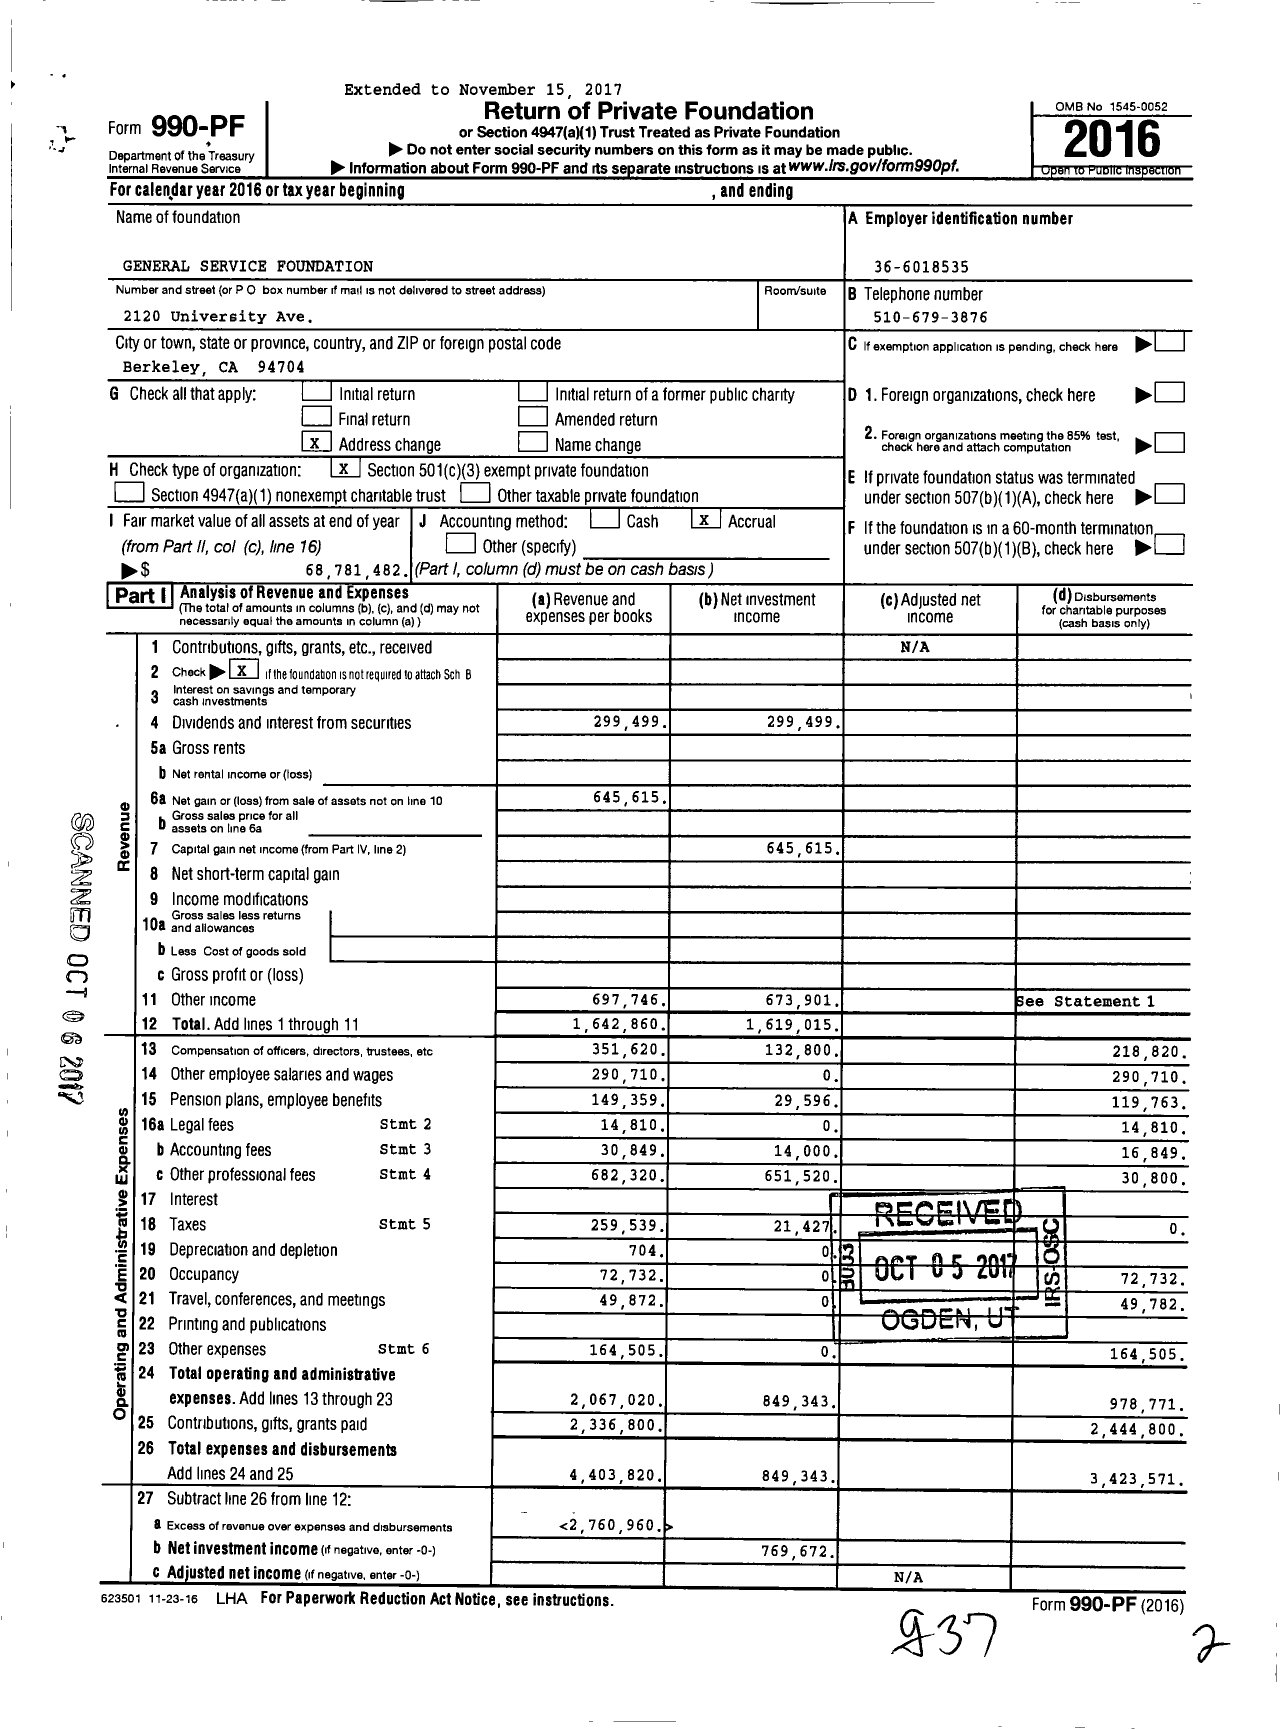 Image of first page of 2016 Form 990PF for General Service Foundation